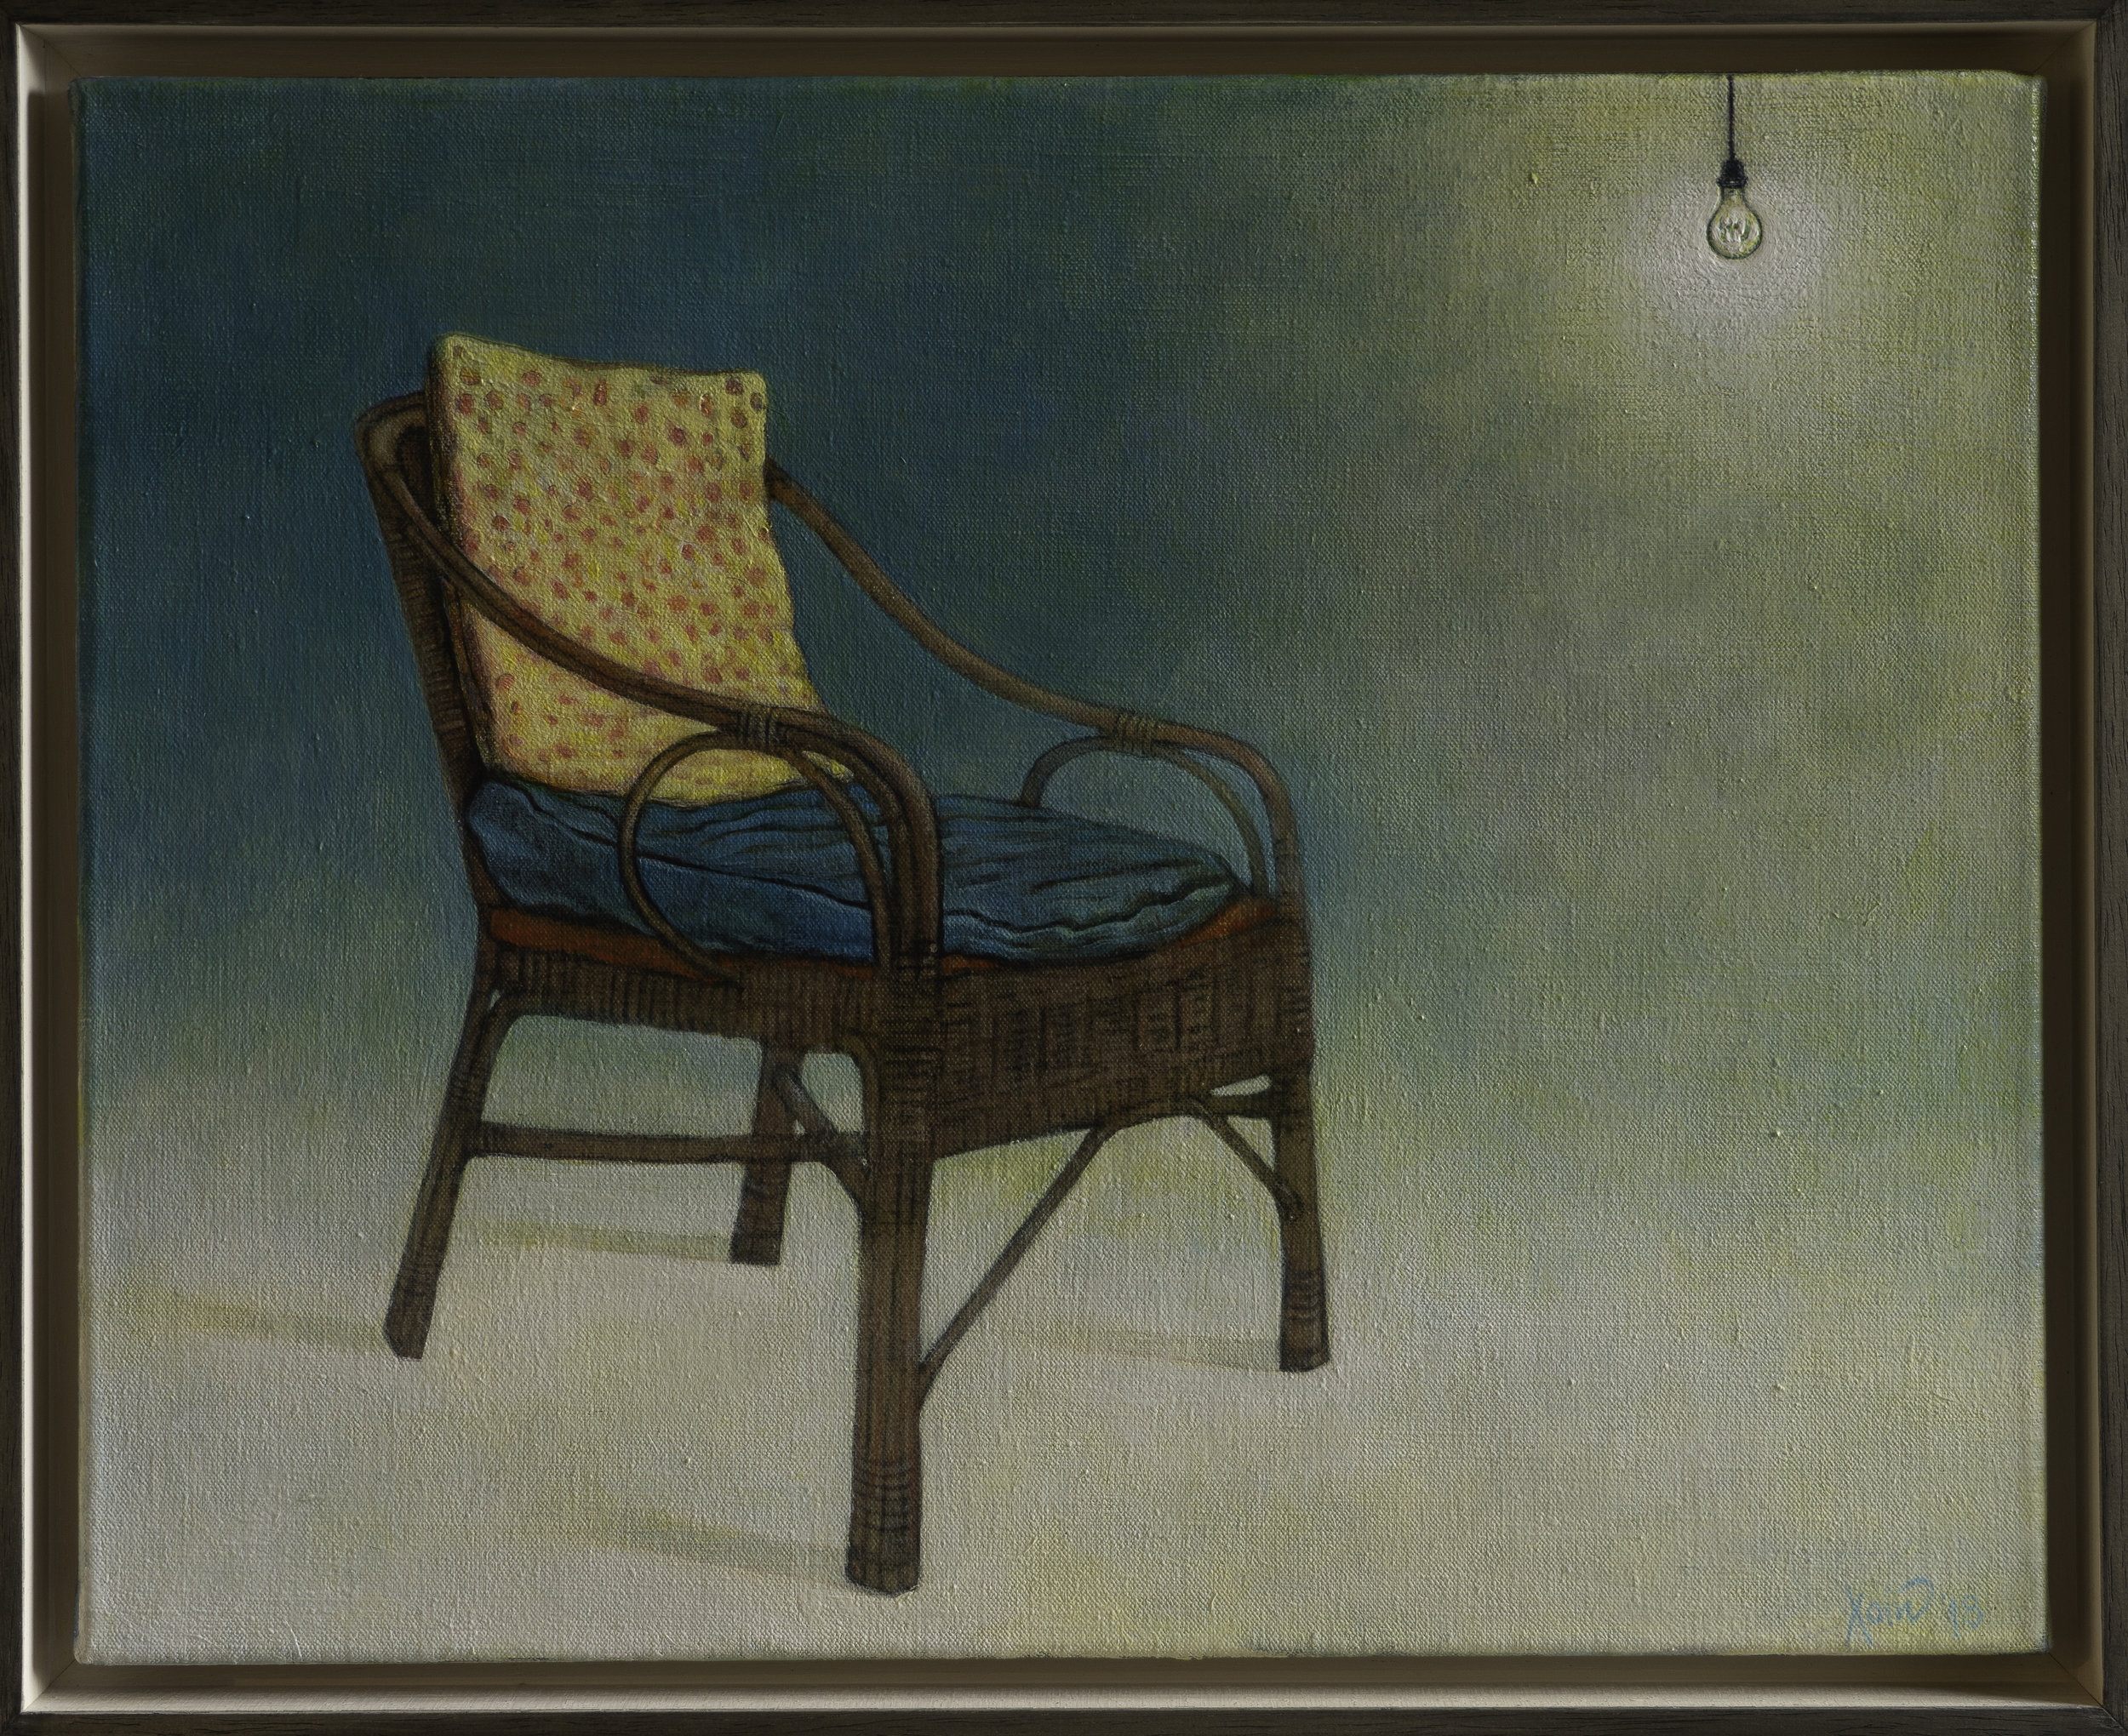 "Old chair with lightbulb" 50cm x 40cm (Framed) Charcoal and acrylic on linen, 2018.